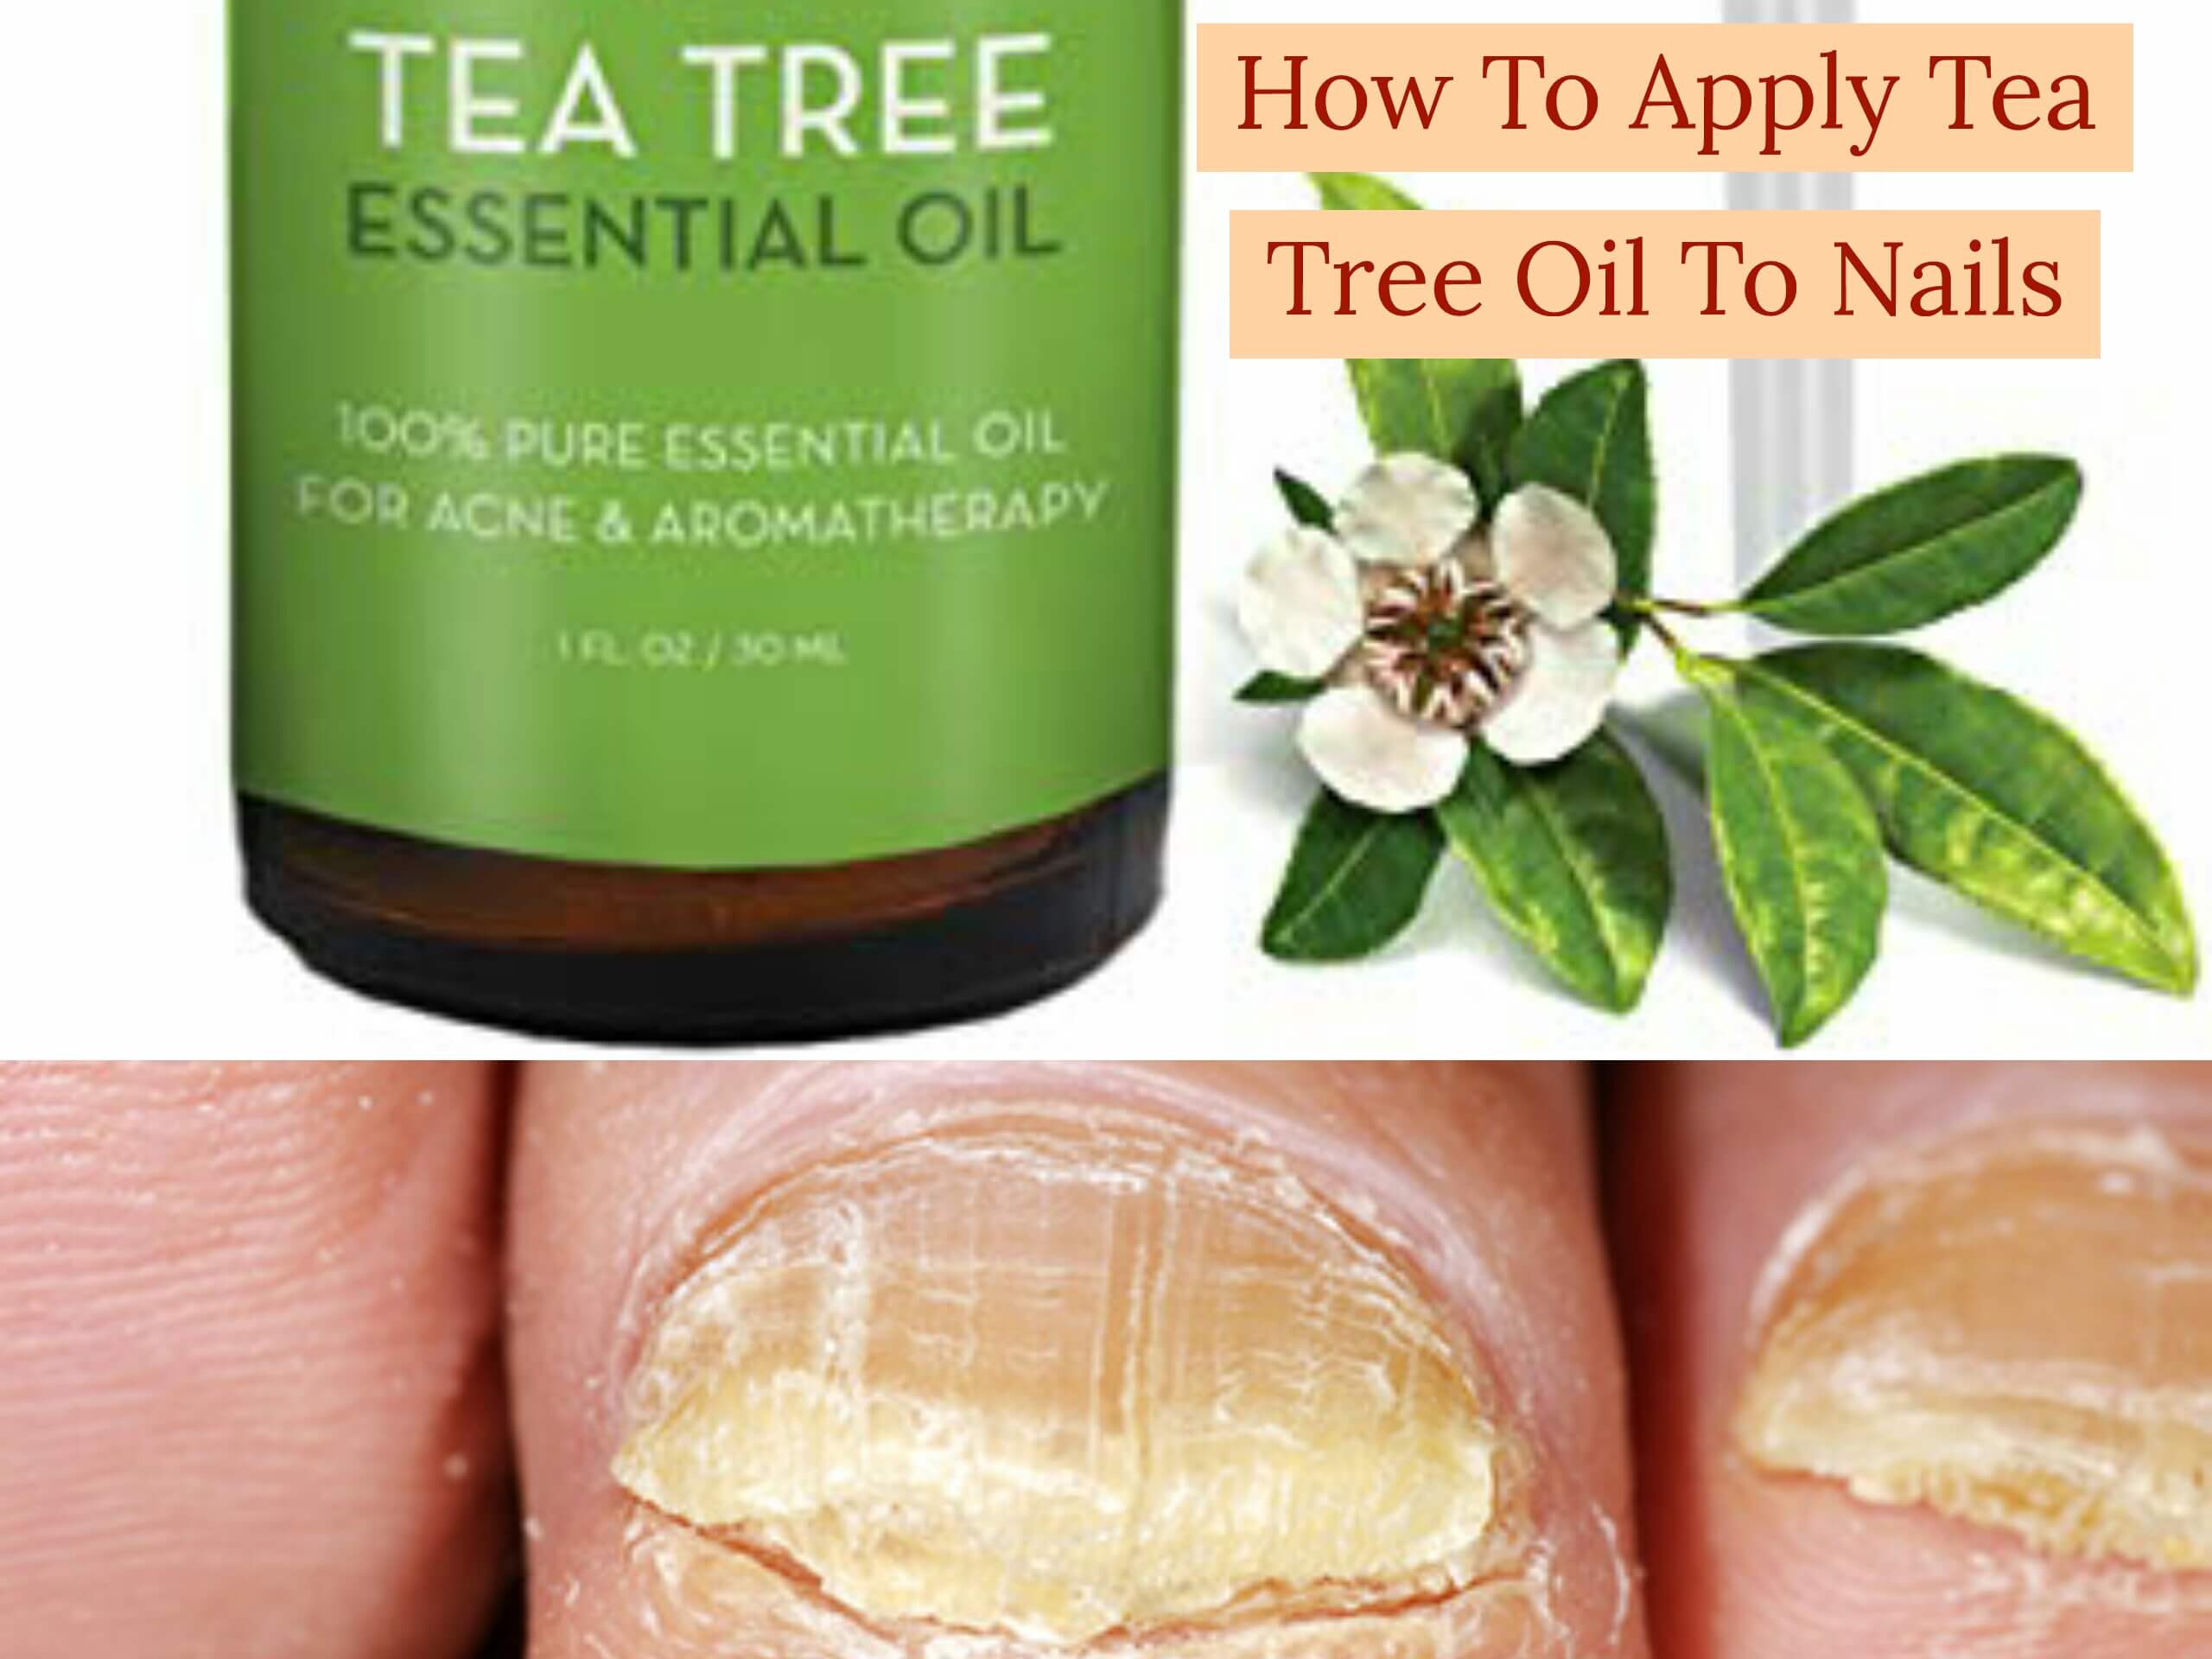 how to apply tea tree oil to nails